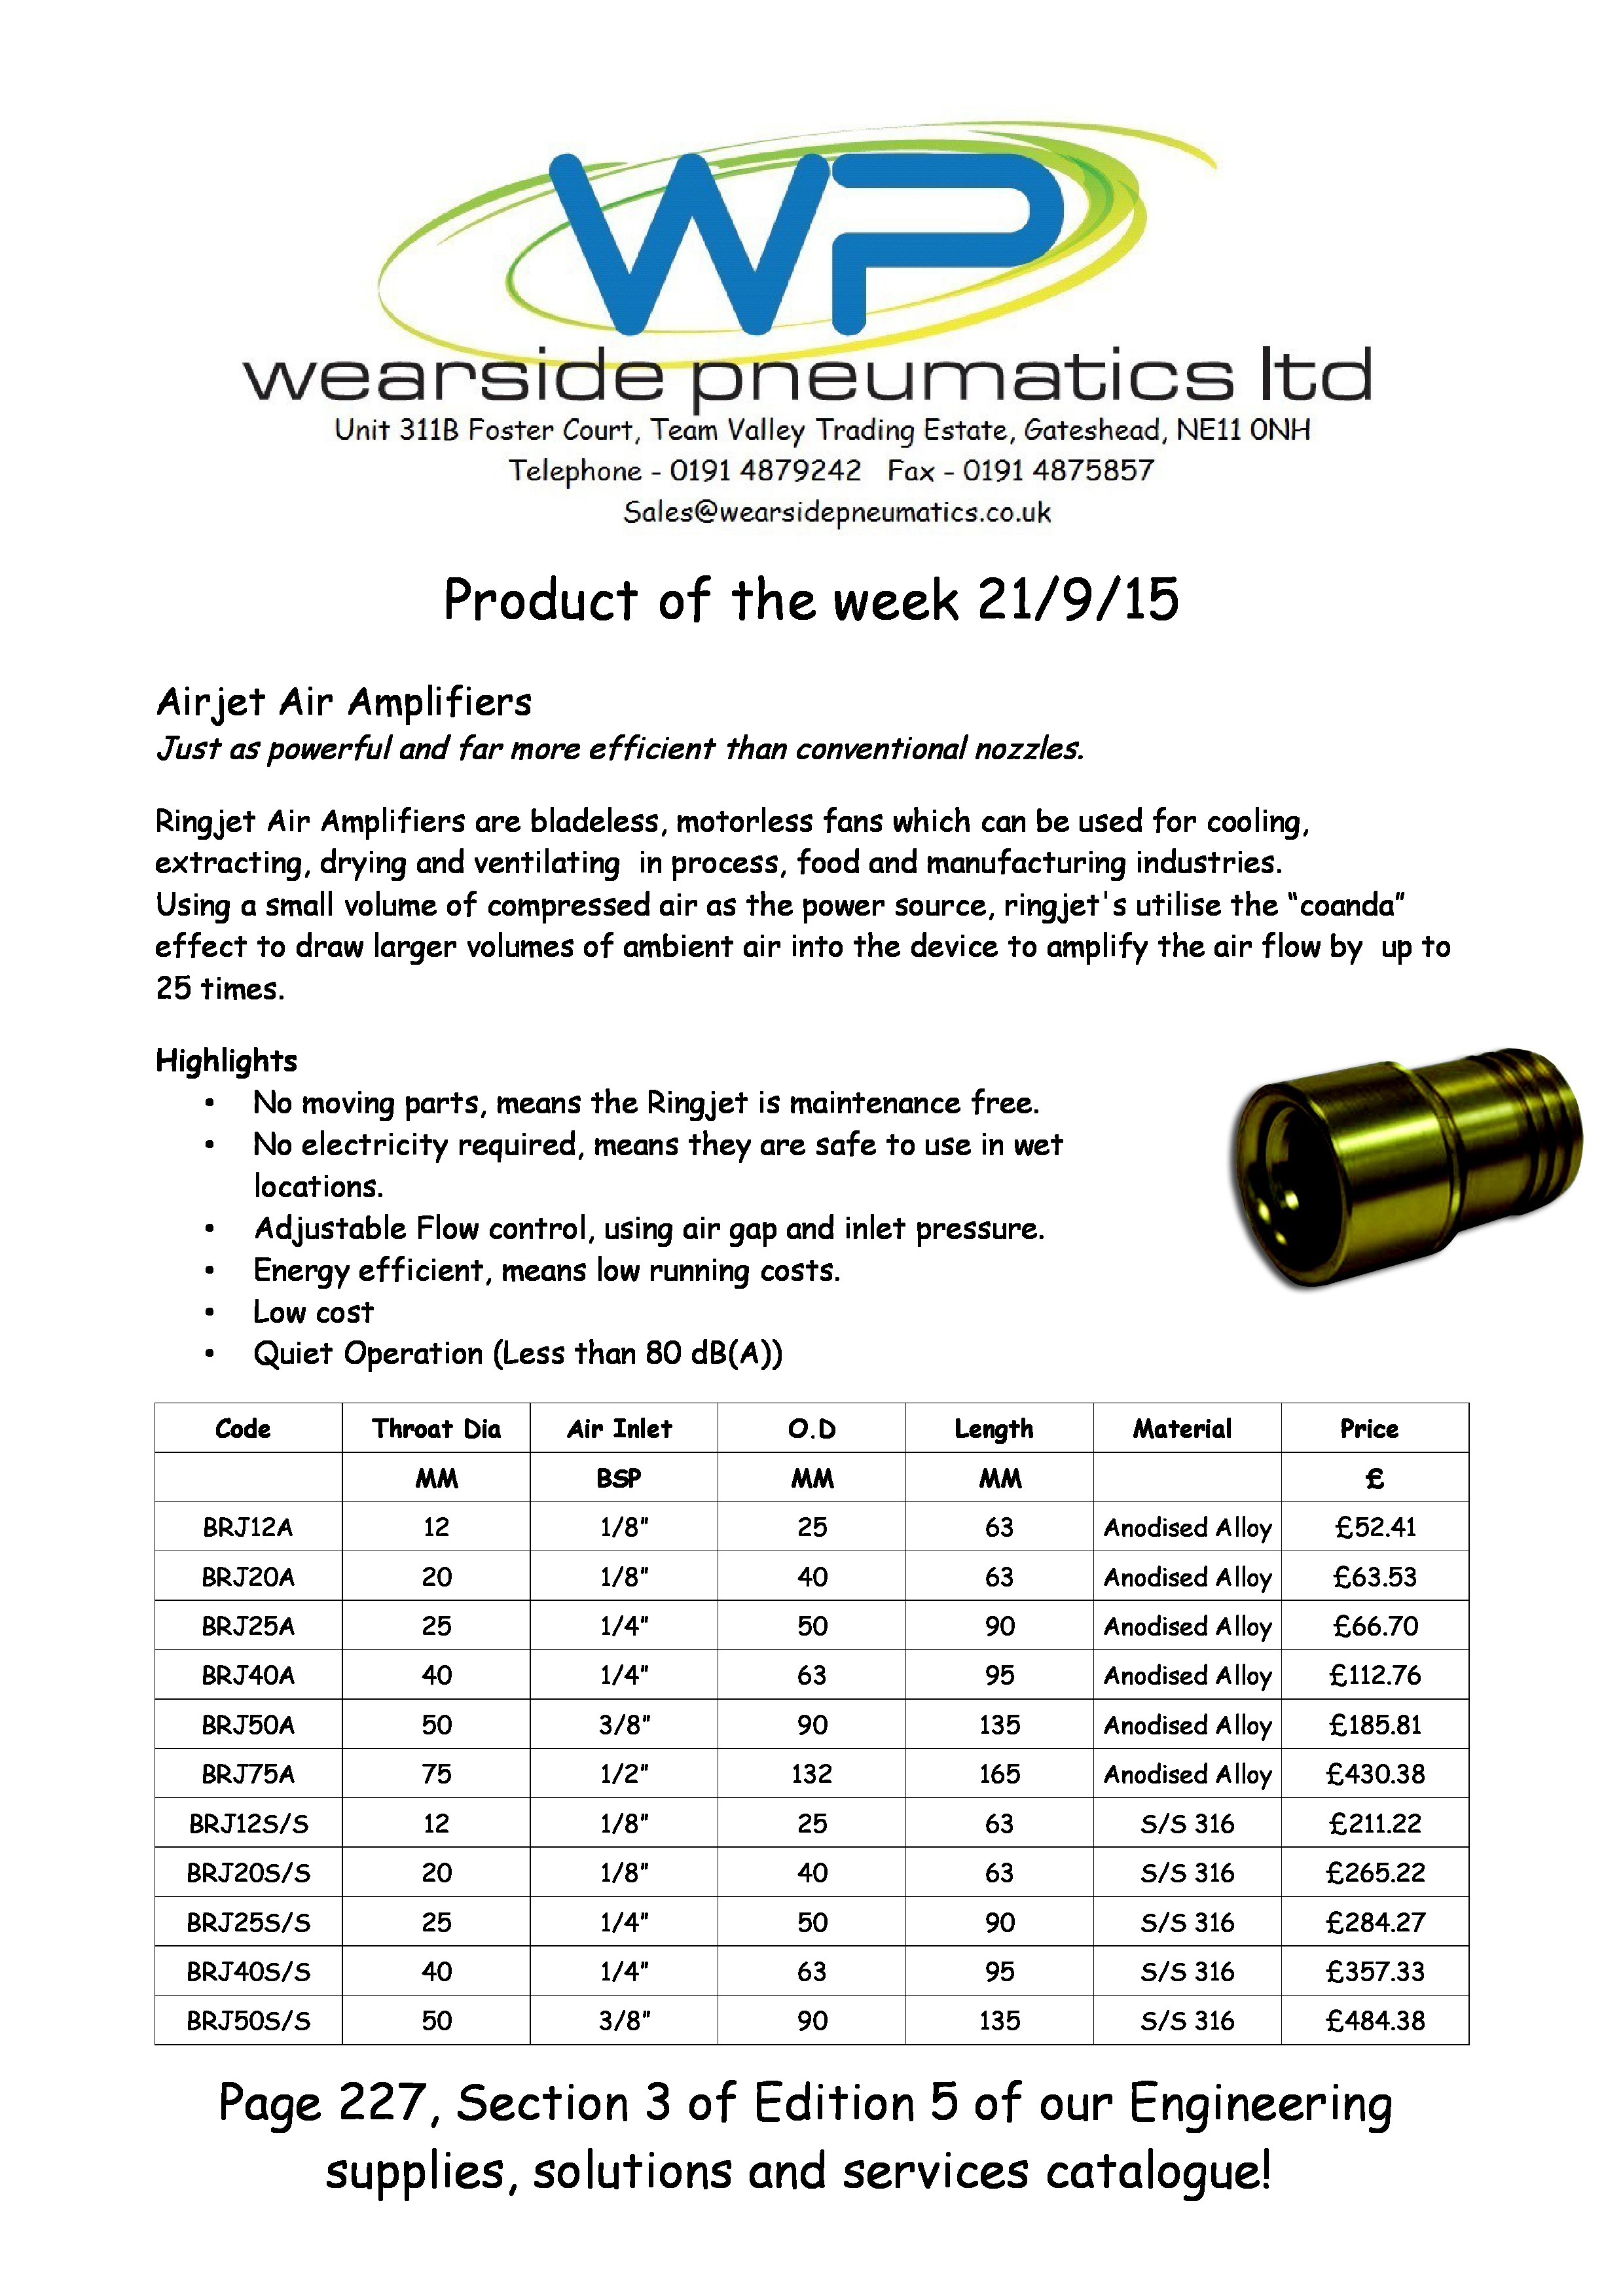 Product of the week! – Air Jet Air Amplifiers – 21/9/15